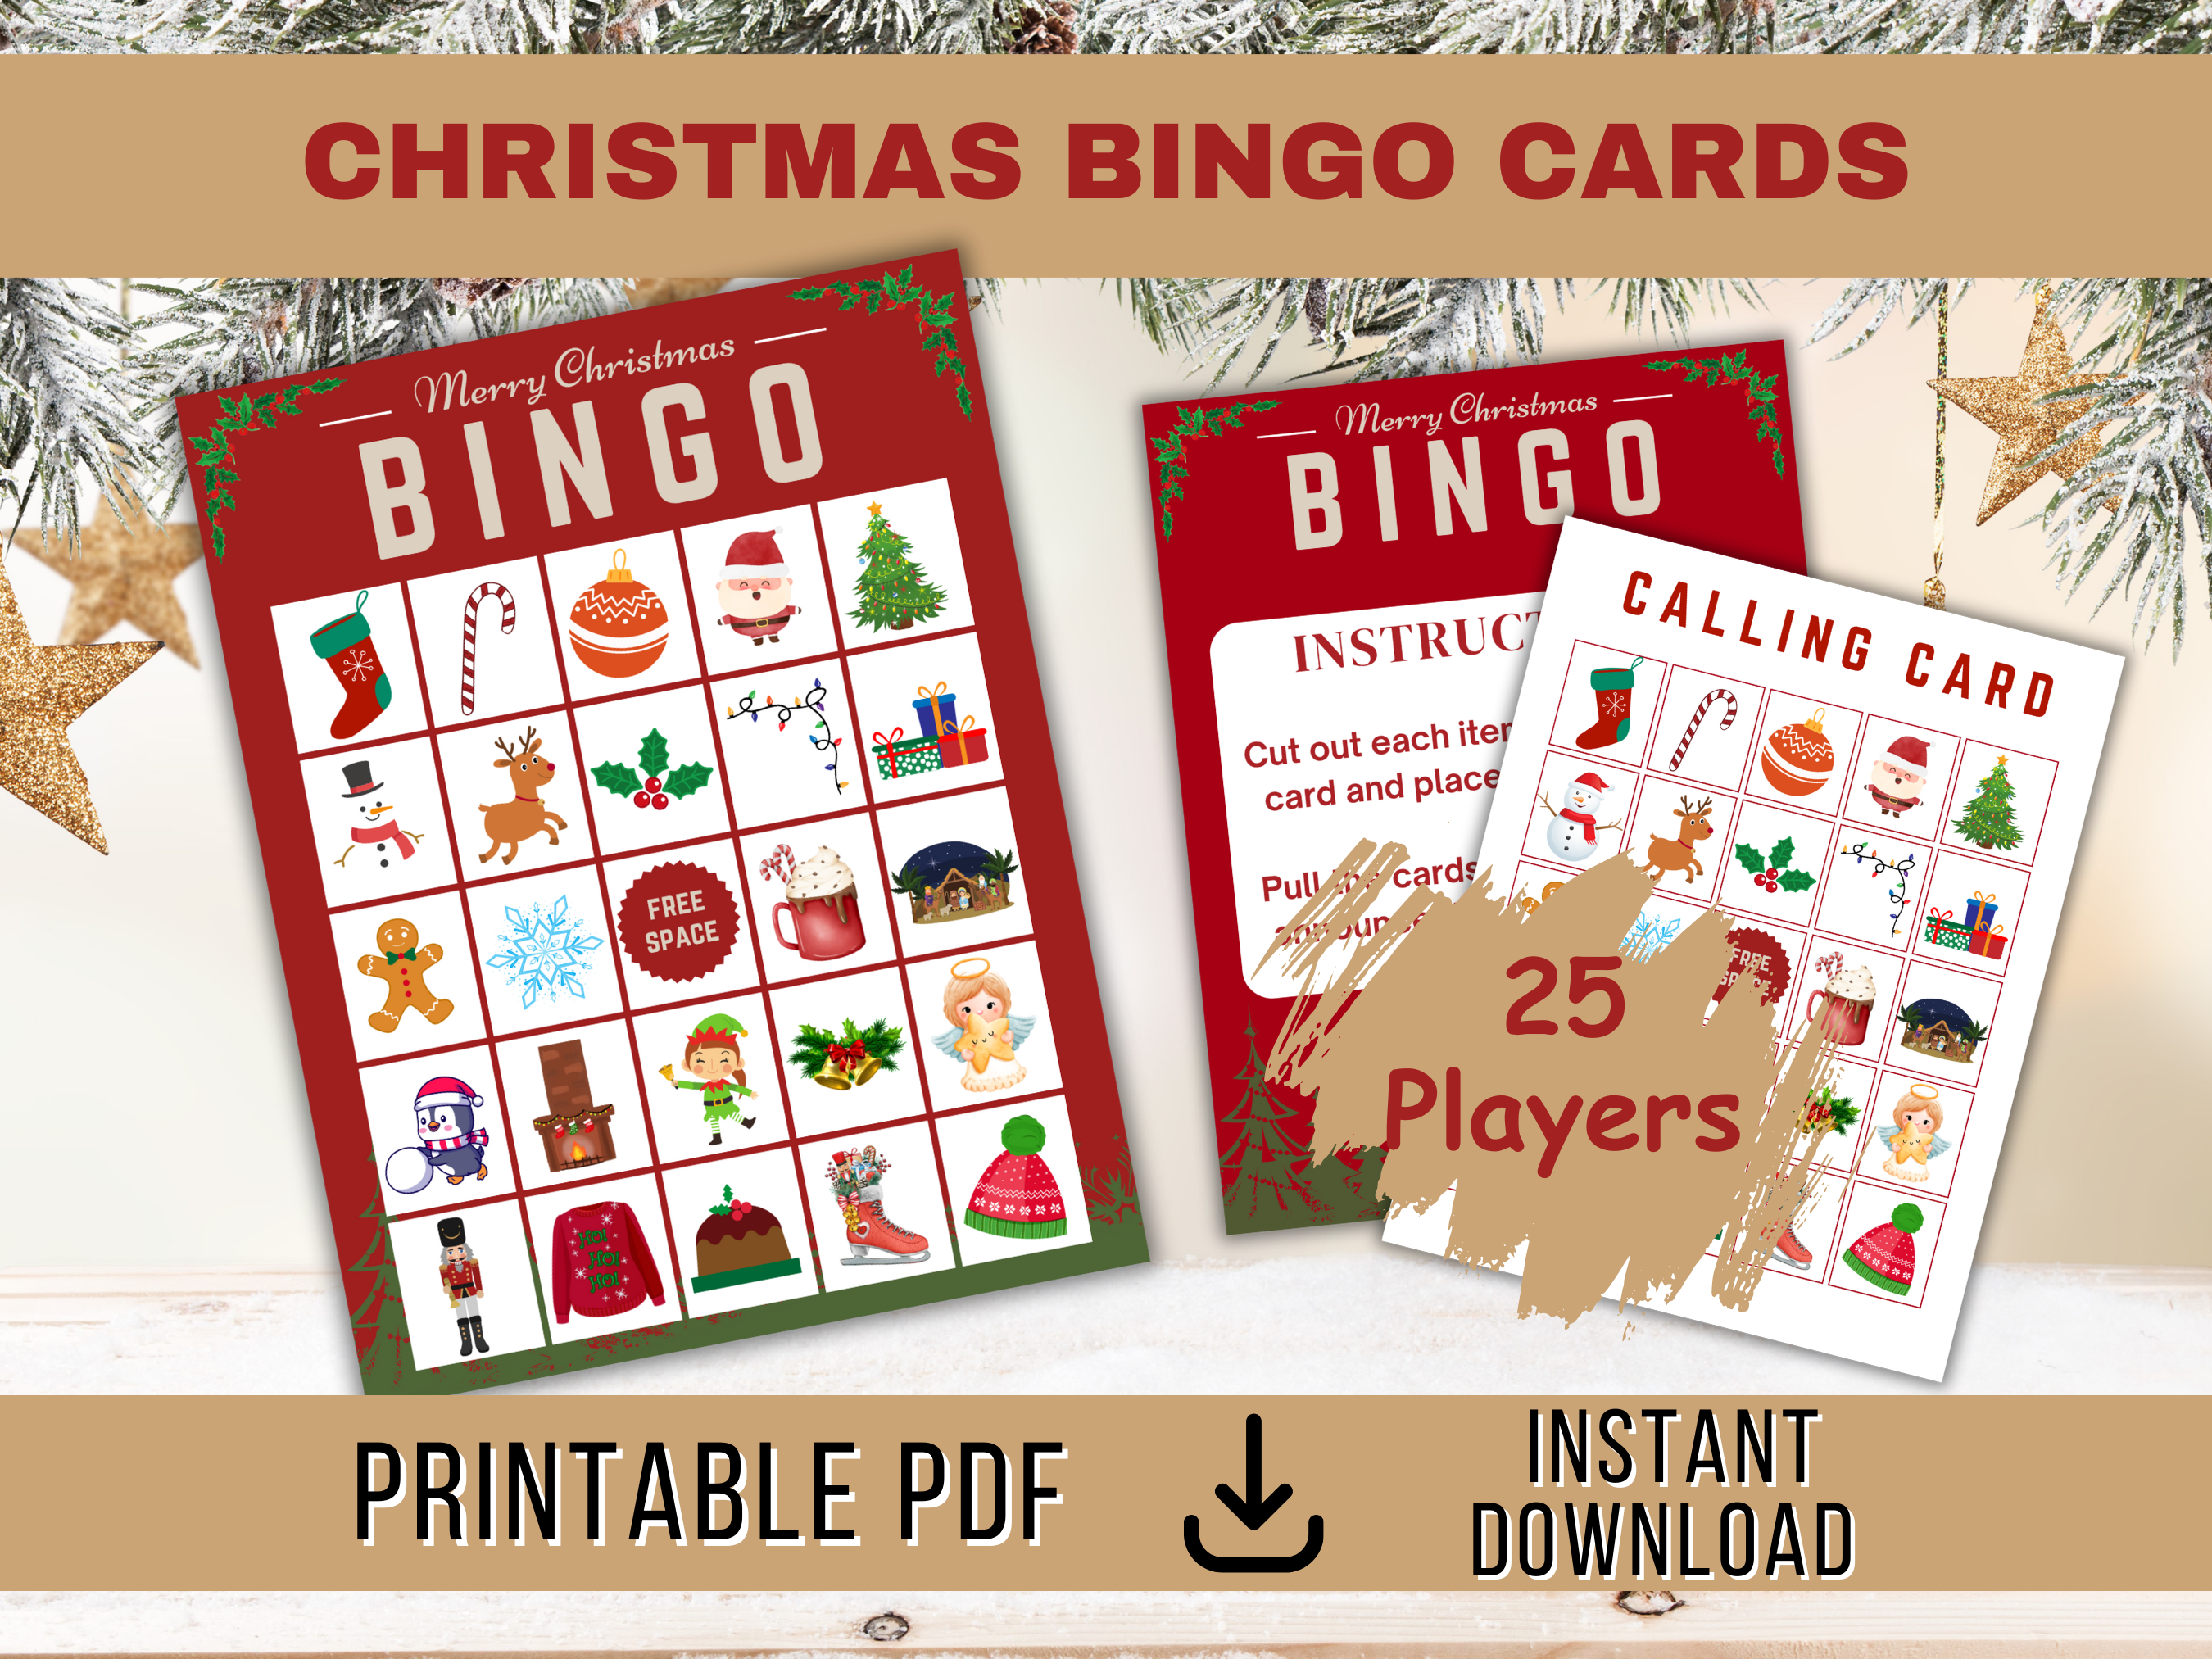 Printable Christmas Bingo Cards For Large Groups A Sparkle Of Genius - Free Printable Bingo Cards For Large Groups